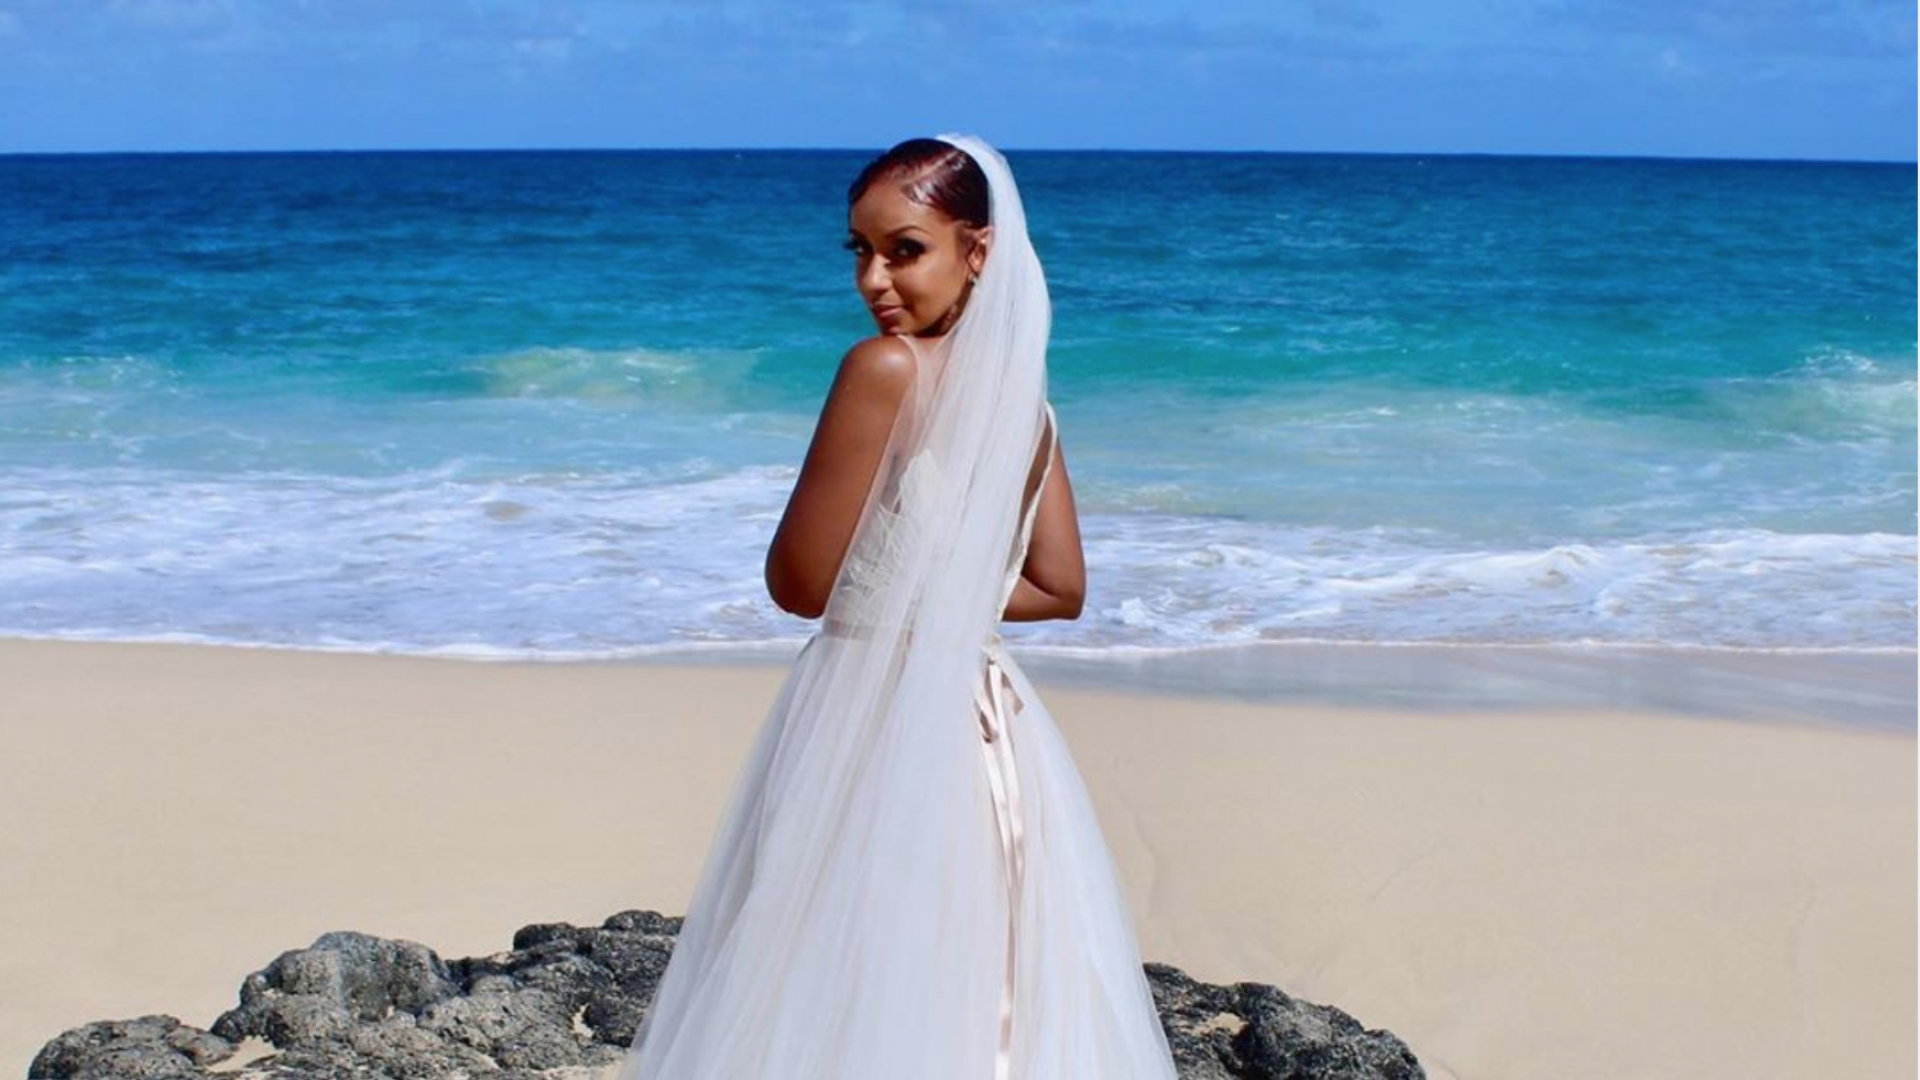 Plot Twist! Singer Mya Married Herself For New Music Video "The Truth"